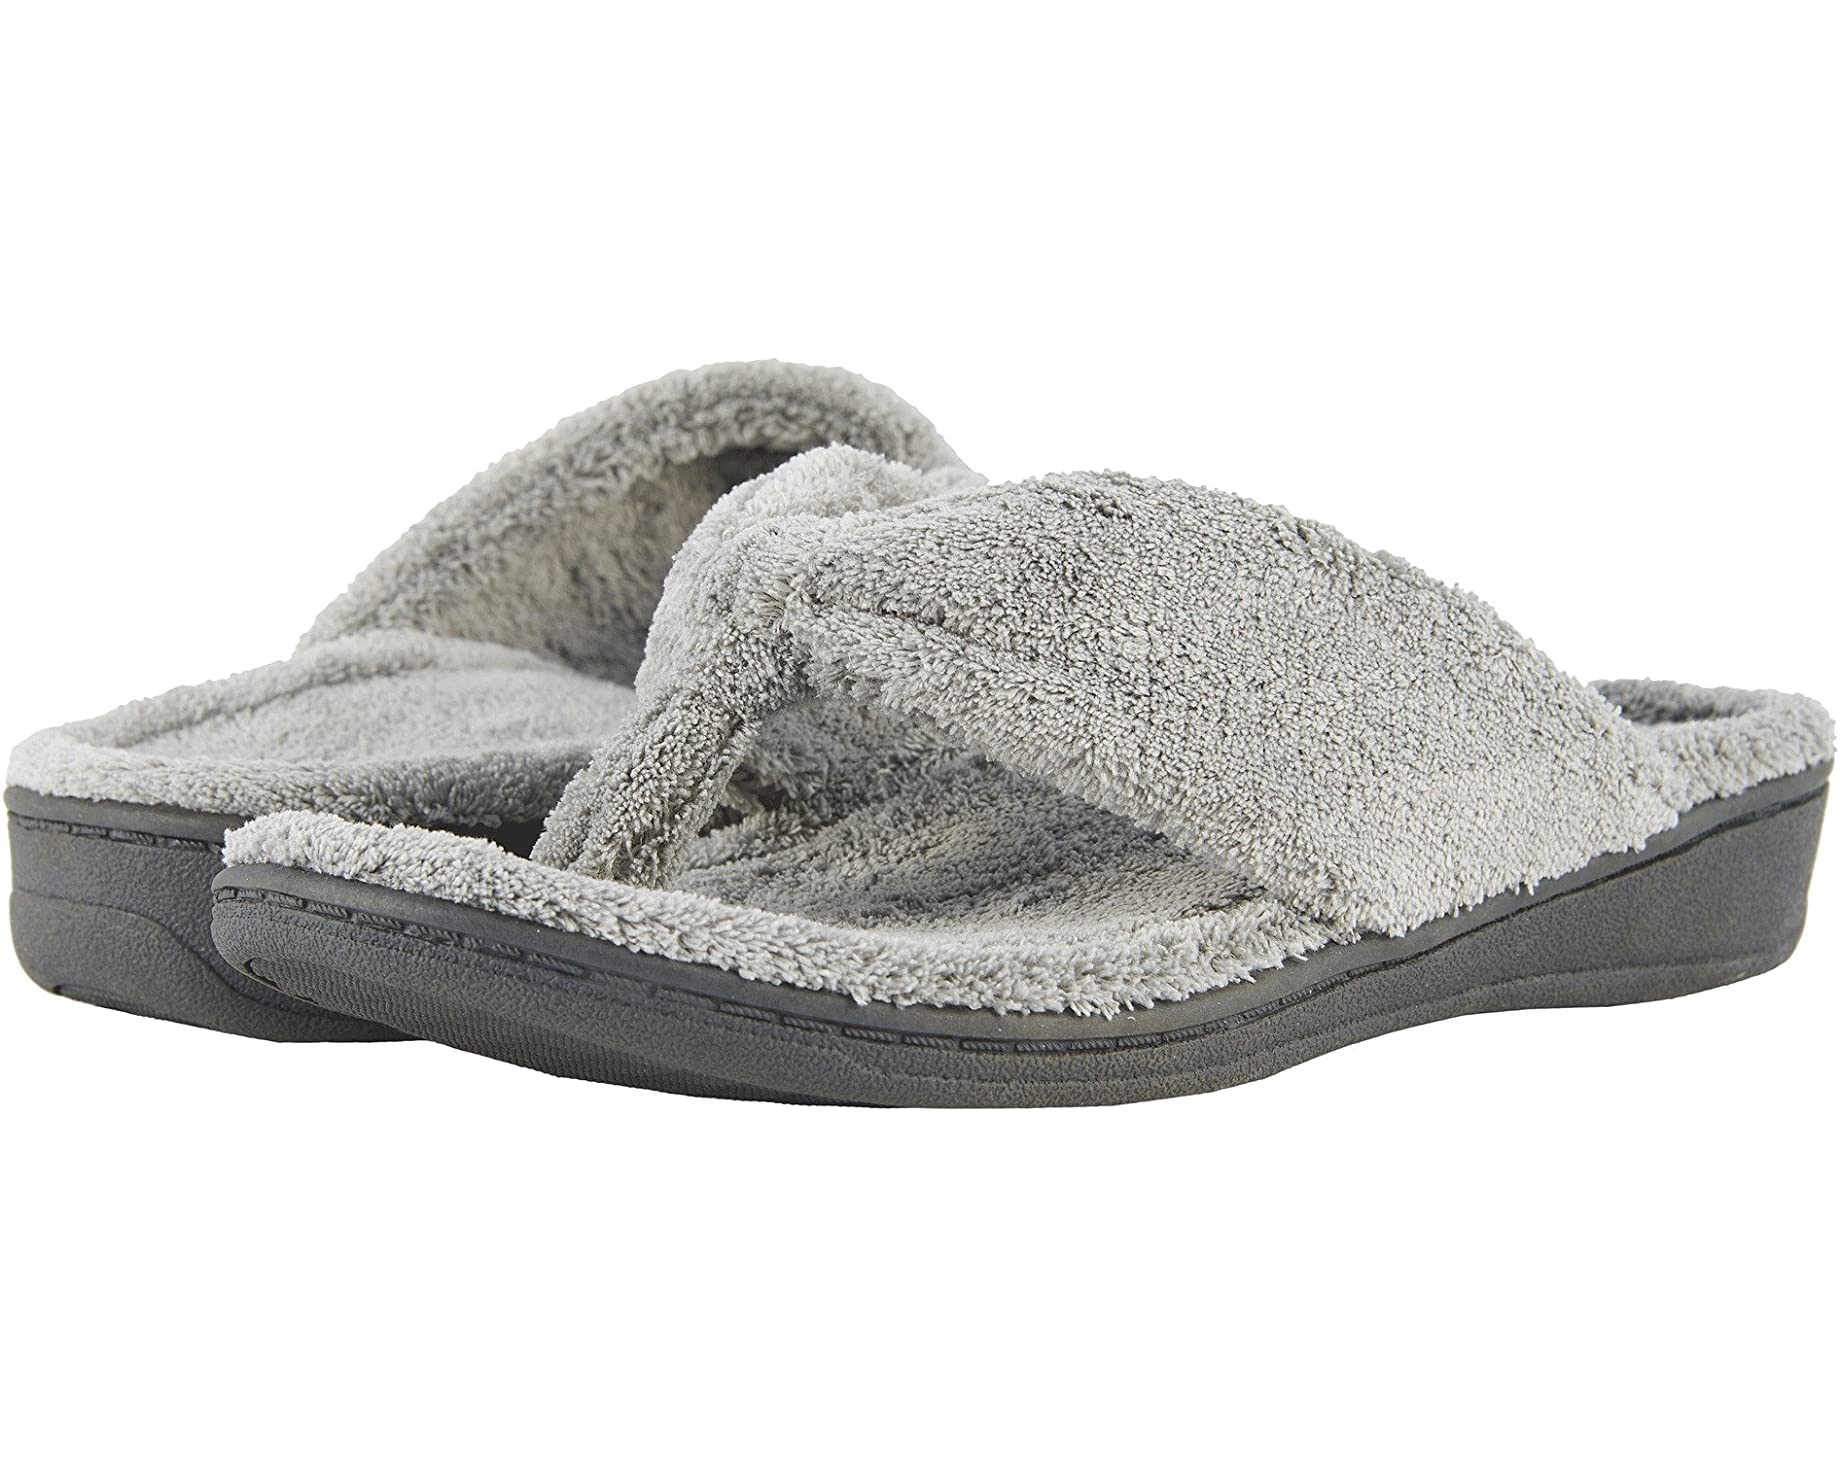 Why Slippers For Leg Pain Are Good – Solethreads